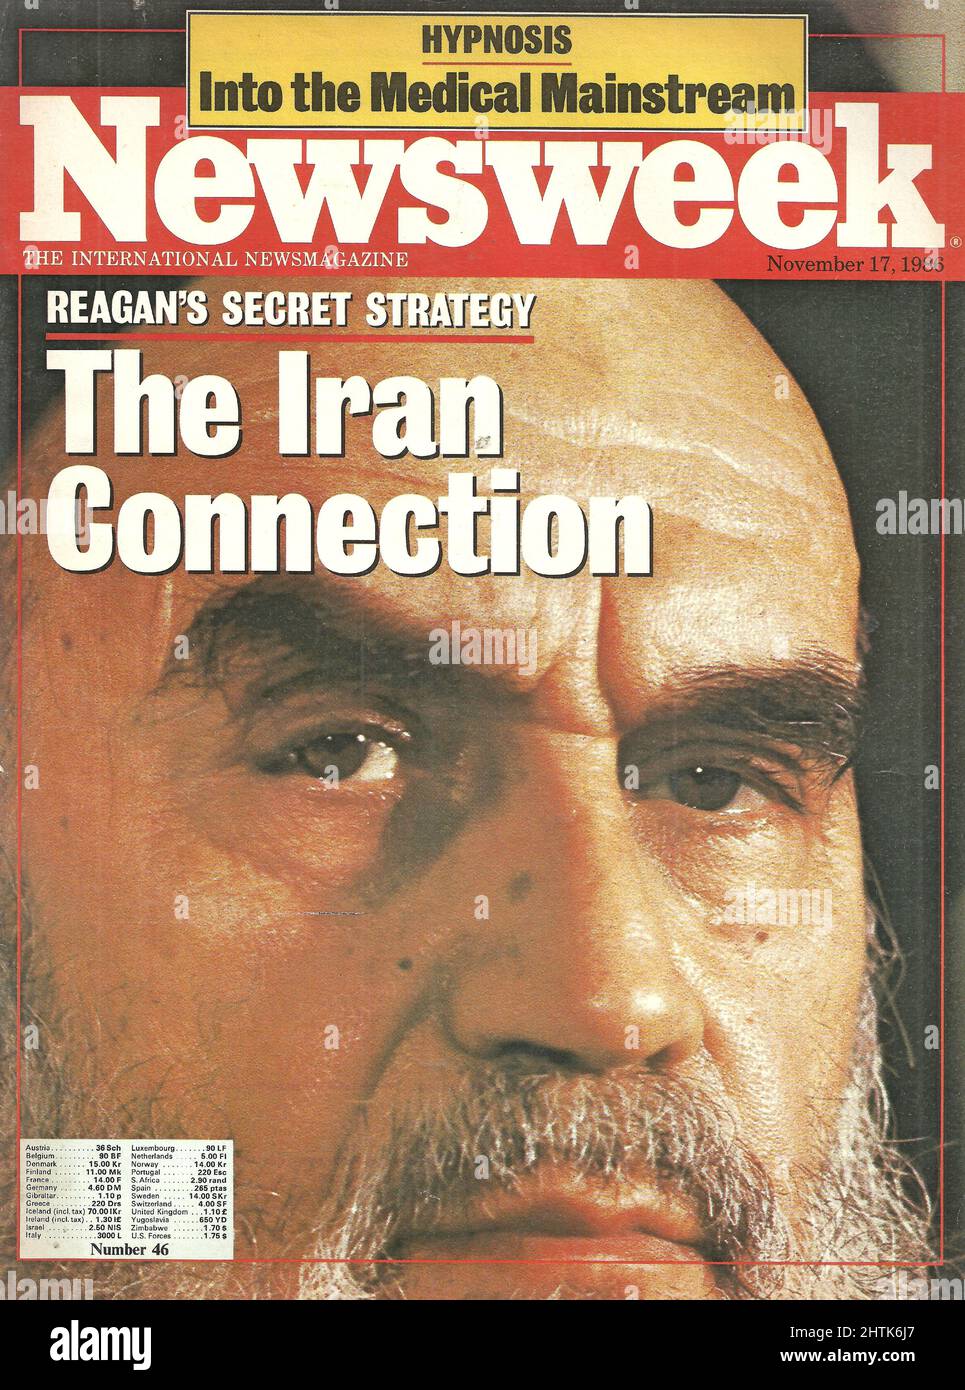 Newsweek Cover November 17 1986 Reagans geheime Strategie The Iran Connection Stockfoto